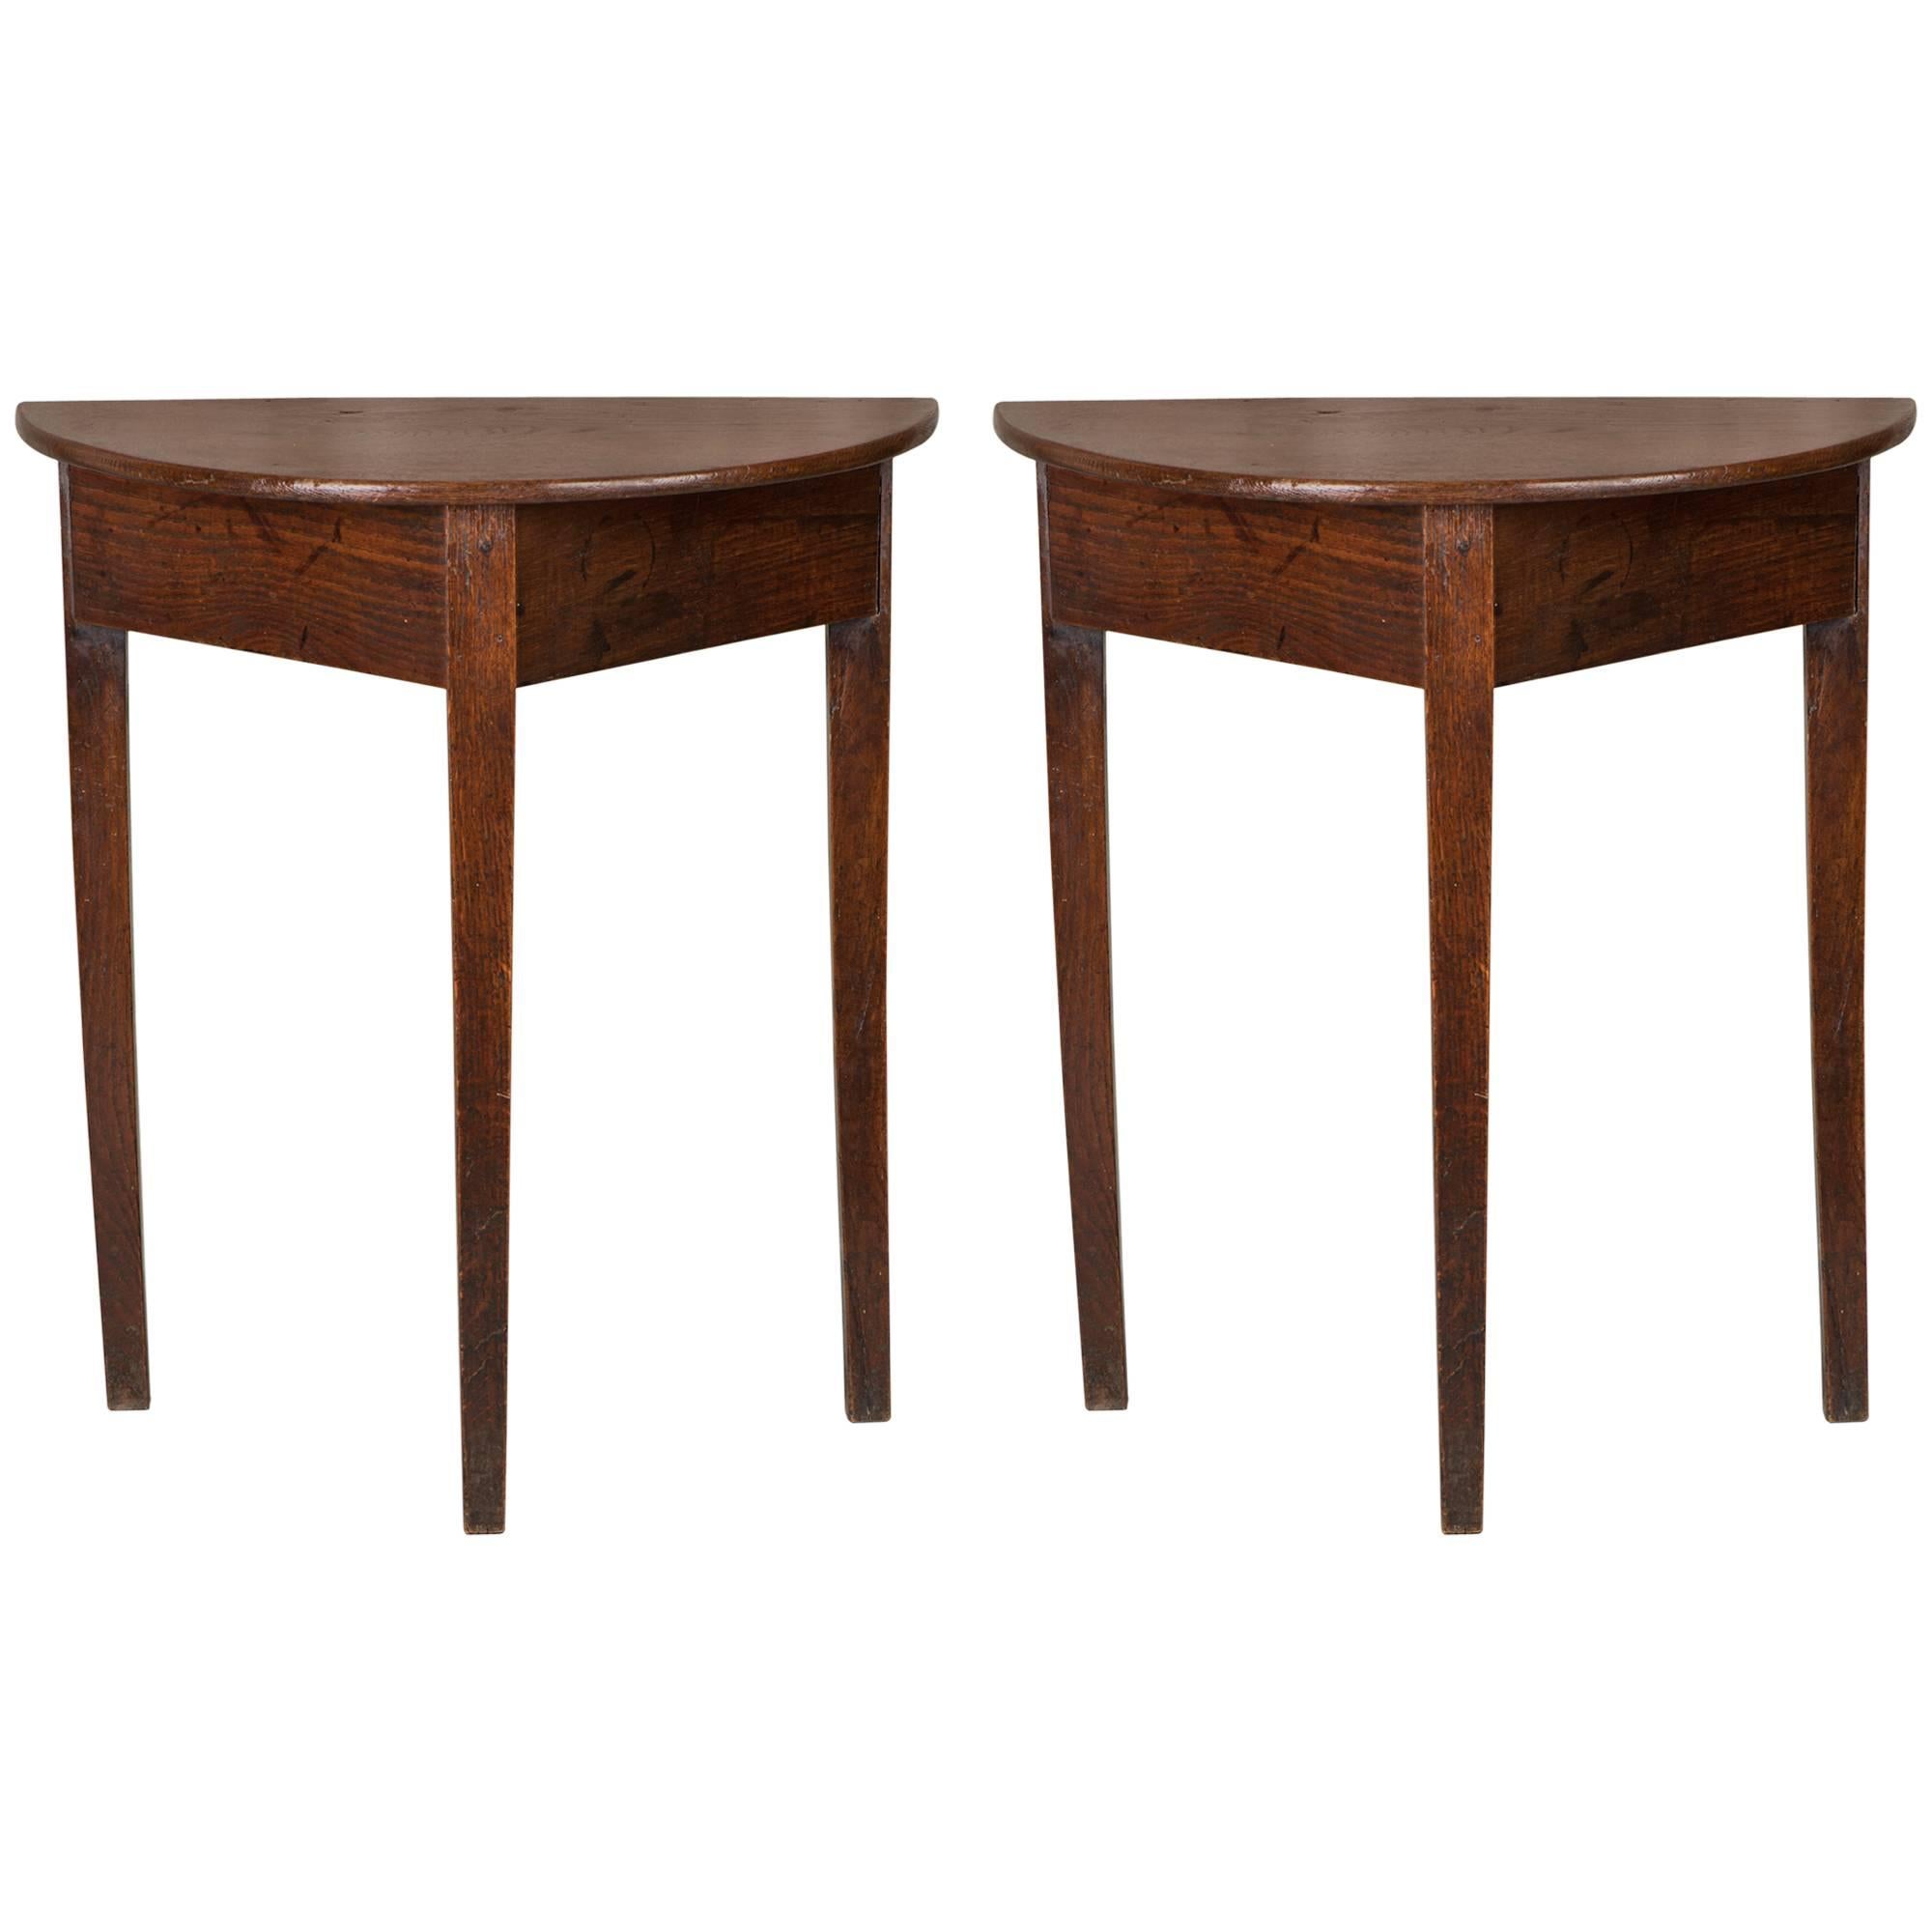 Pair of 19th Century Demilune Tables, England